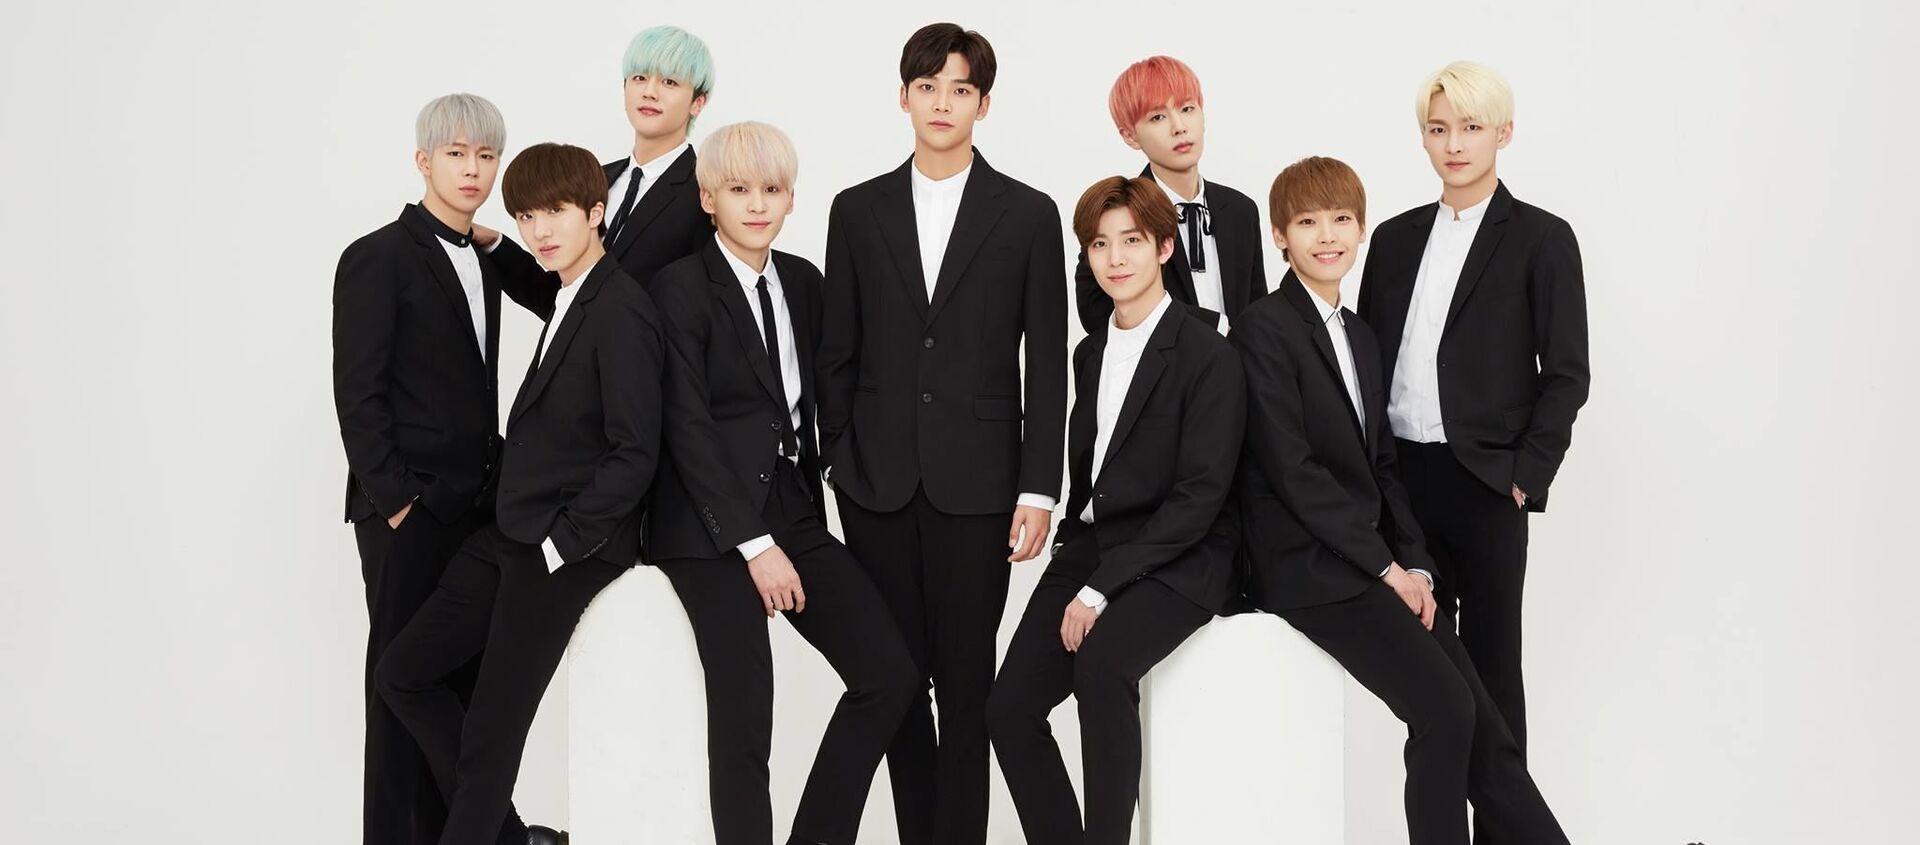 Members of SF9 K-pop boy band renewed their contracts with FNC Ent - Sputnik International, 1920, 02.03.2021